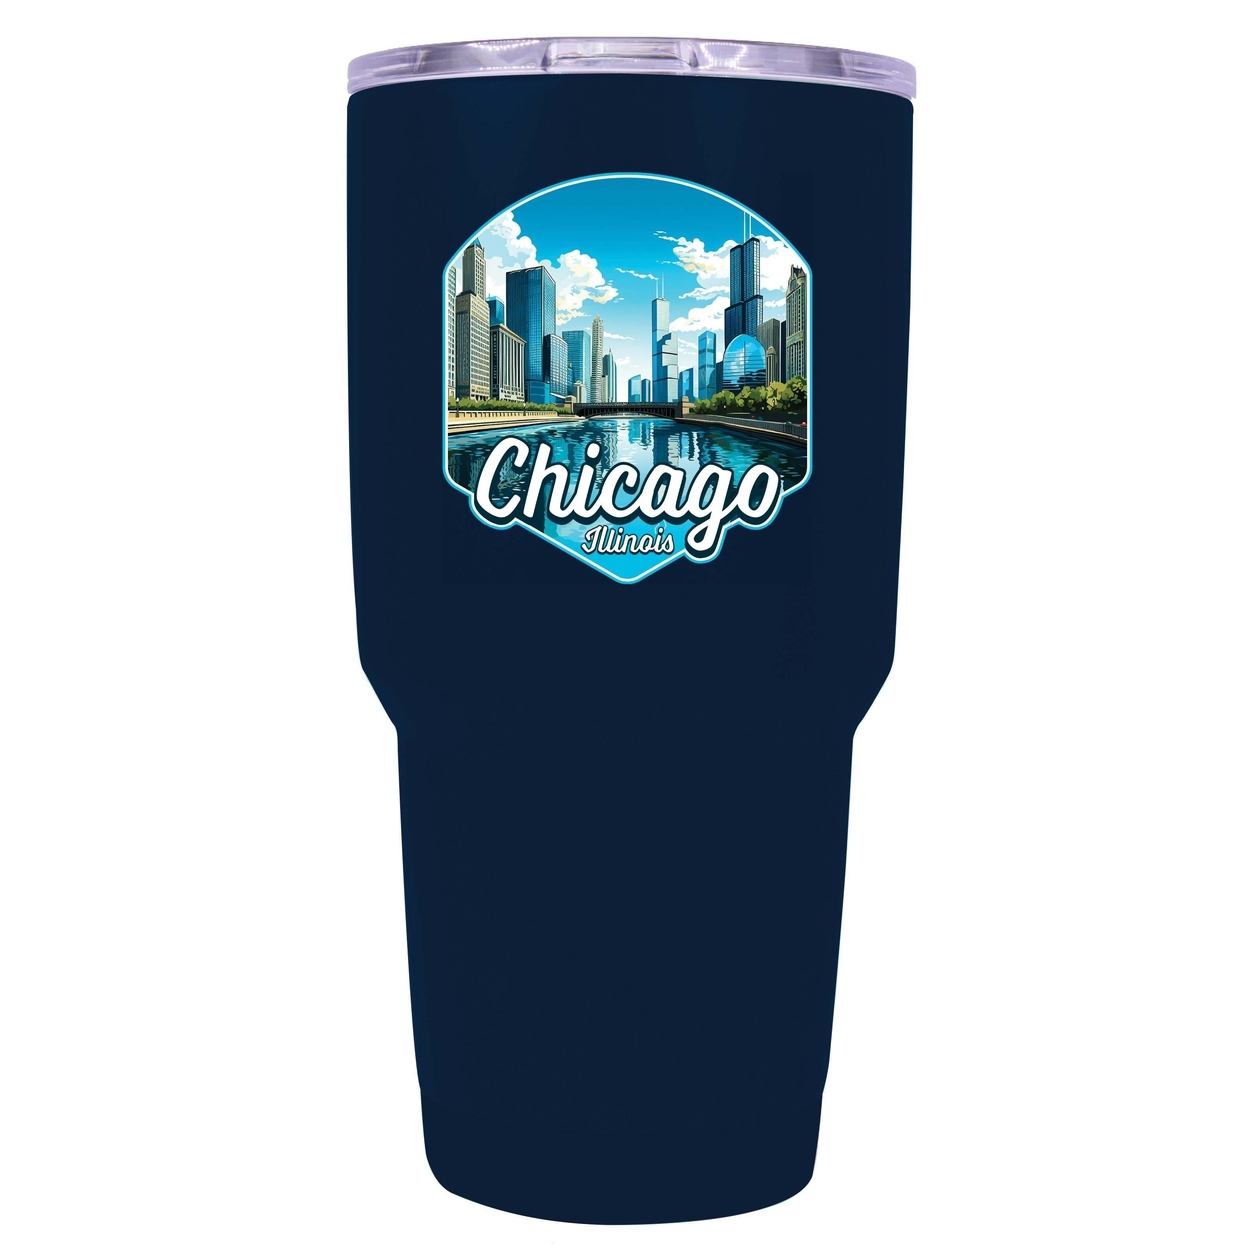 Chicago Illinois A Souvenir 24 Oz Insulated Tumbler - Rose Gold,,4-Pack